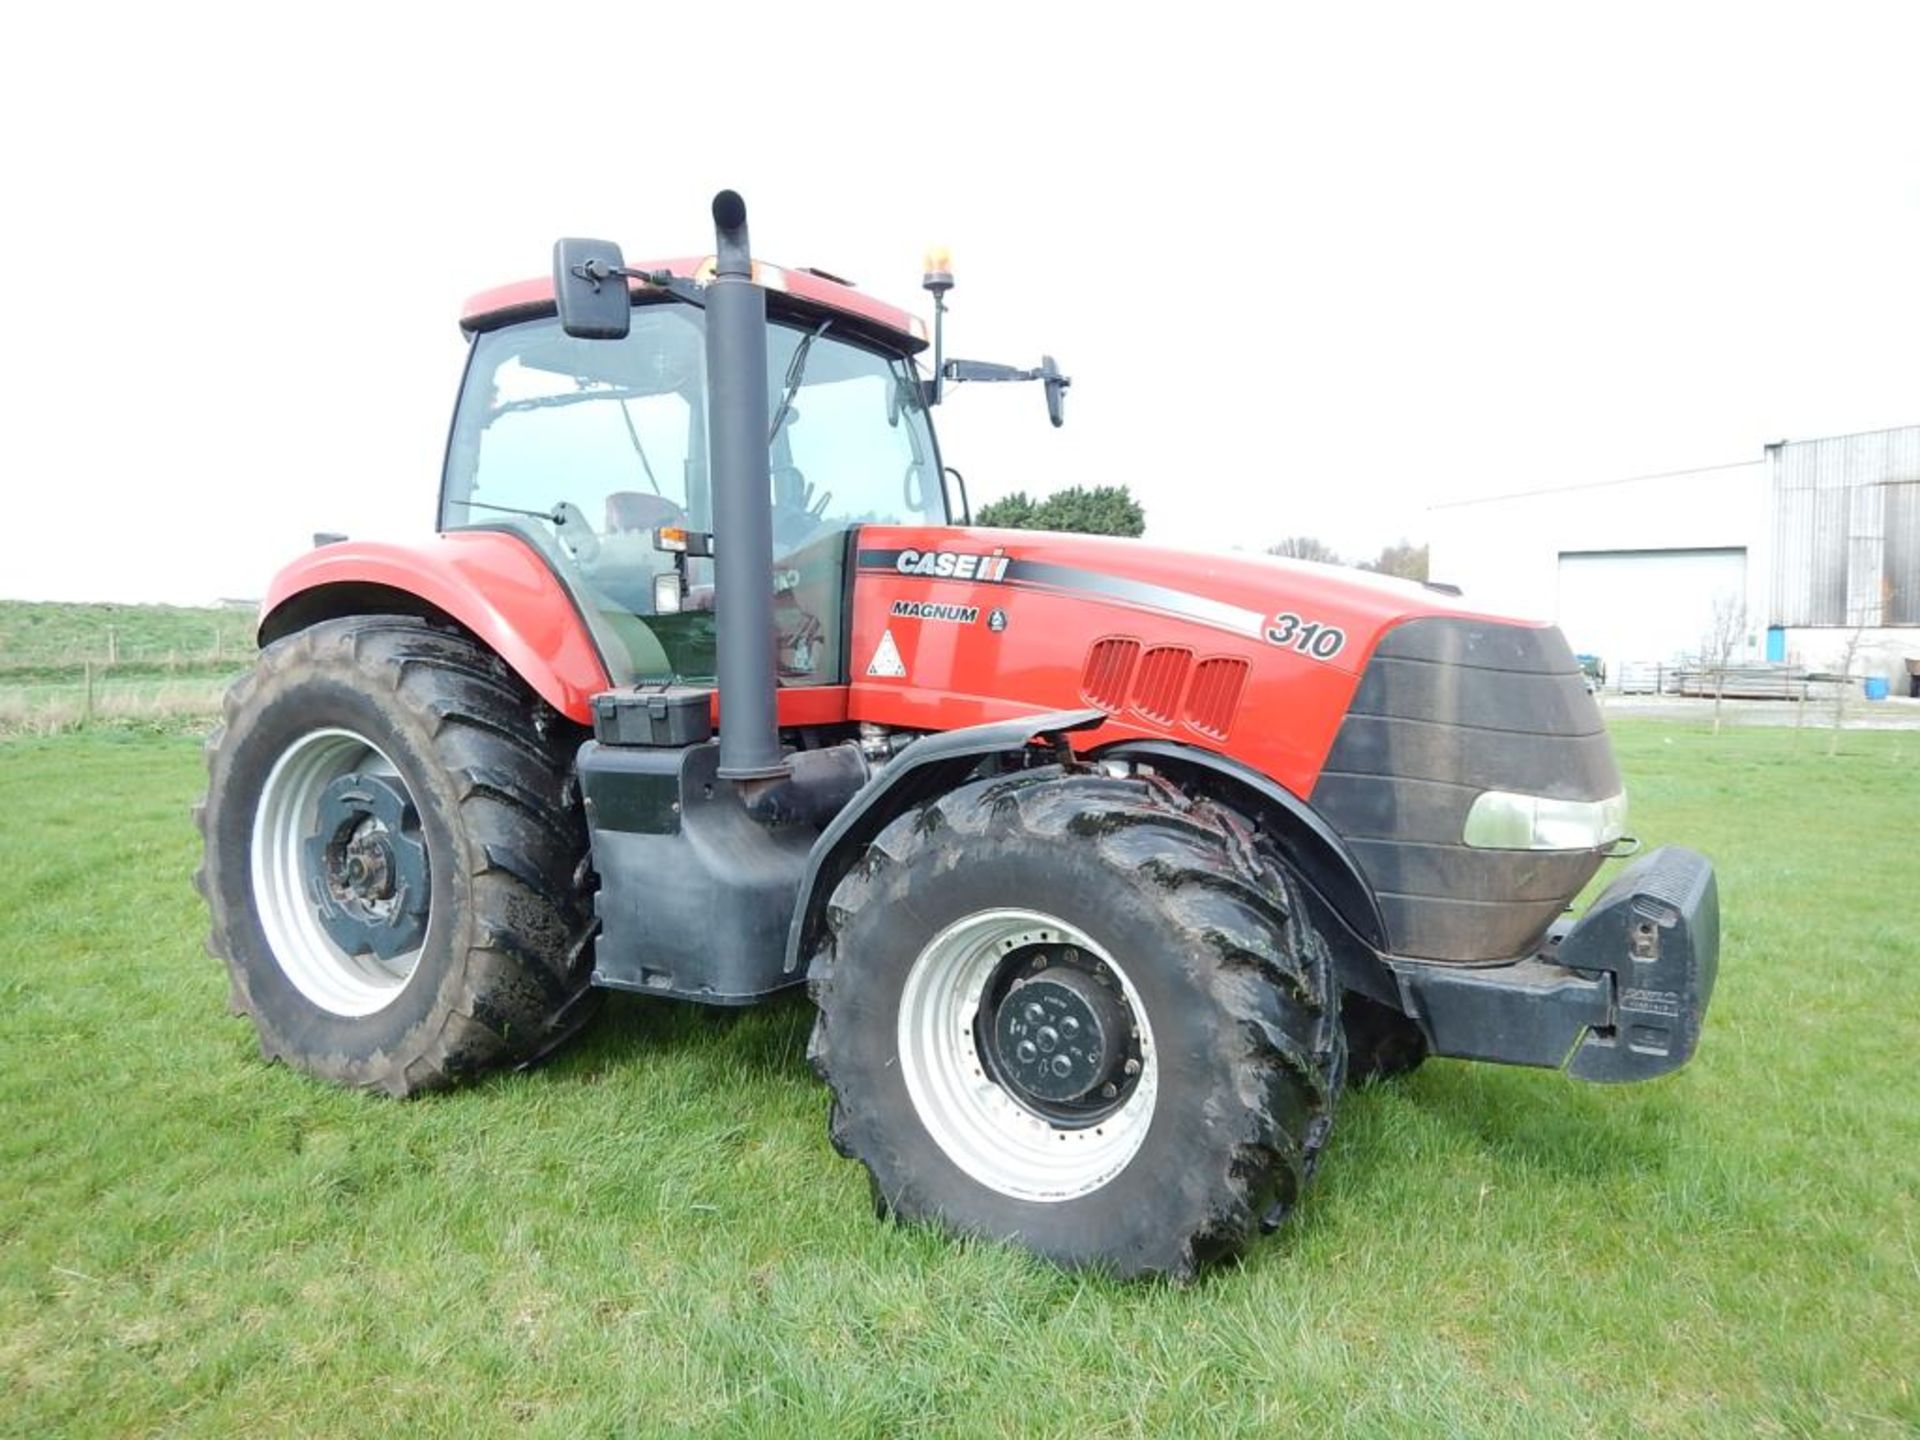 2007 CASE IH 310 Magnum 40kph 4wd TRACTOR Fitted front suspension, front weights, NH guidance - Image 2 of 8